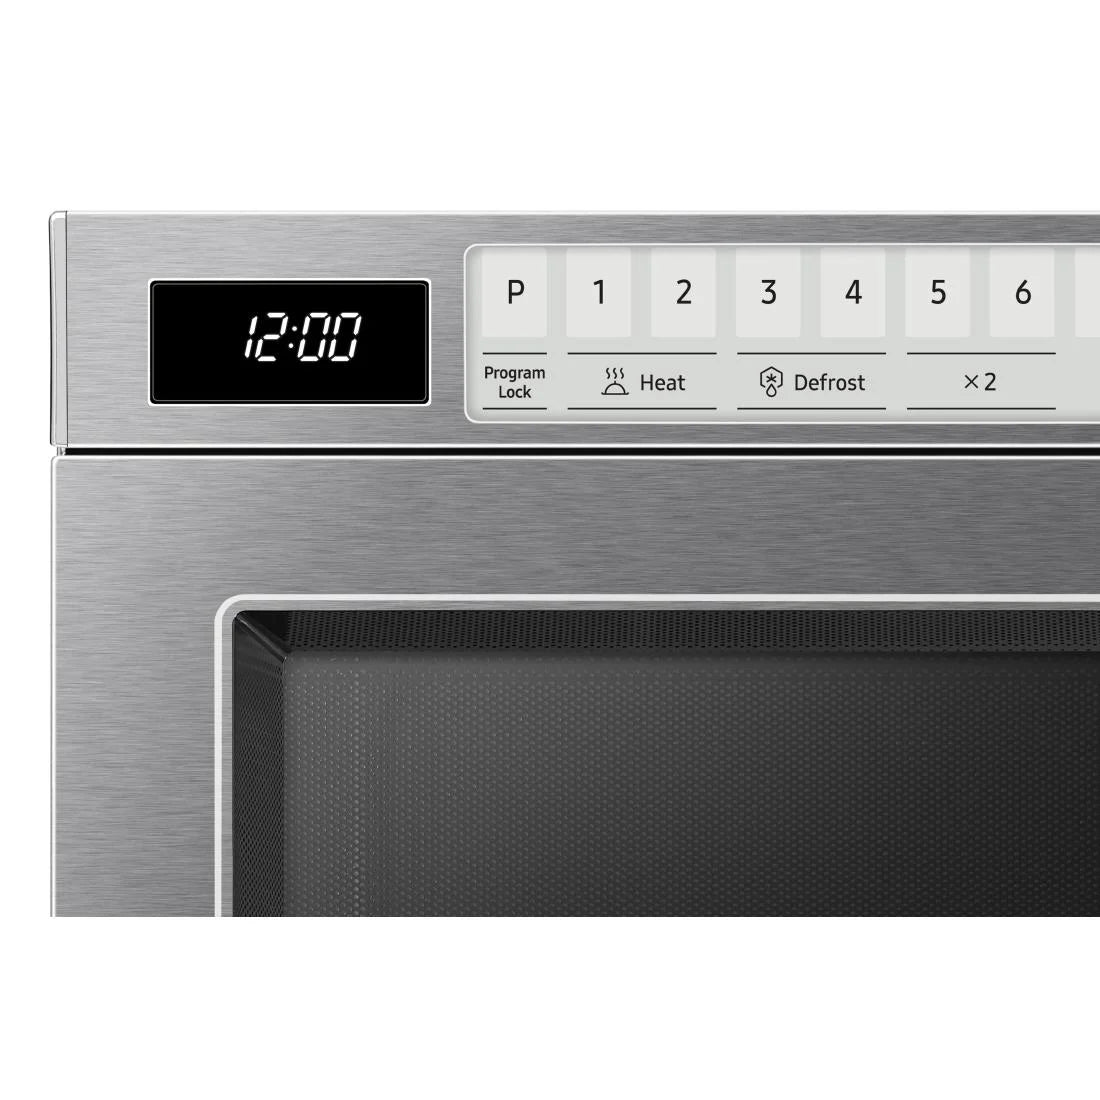 Samsung Commercial Microwave Digital 26Ltr 1000W.Product Ref:00593.Model: FS319. 🚚 1-3 Days Delivery